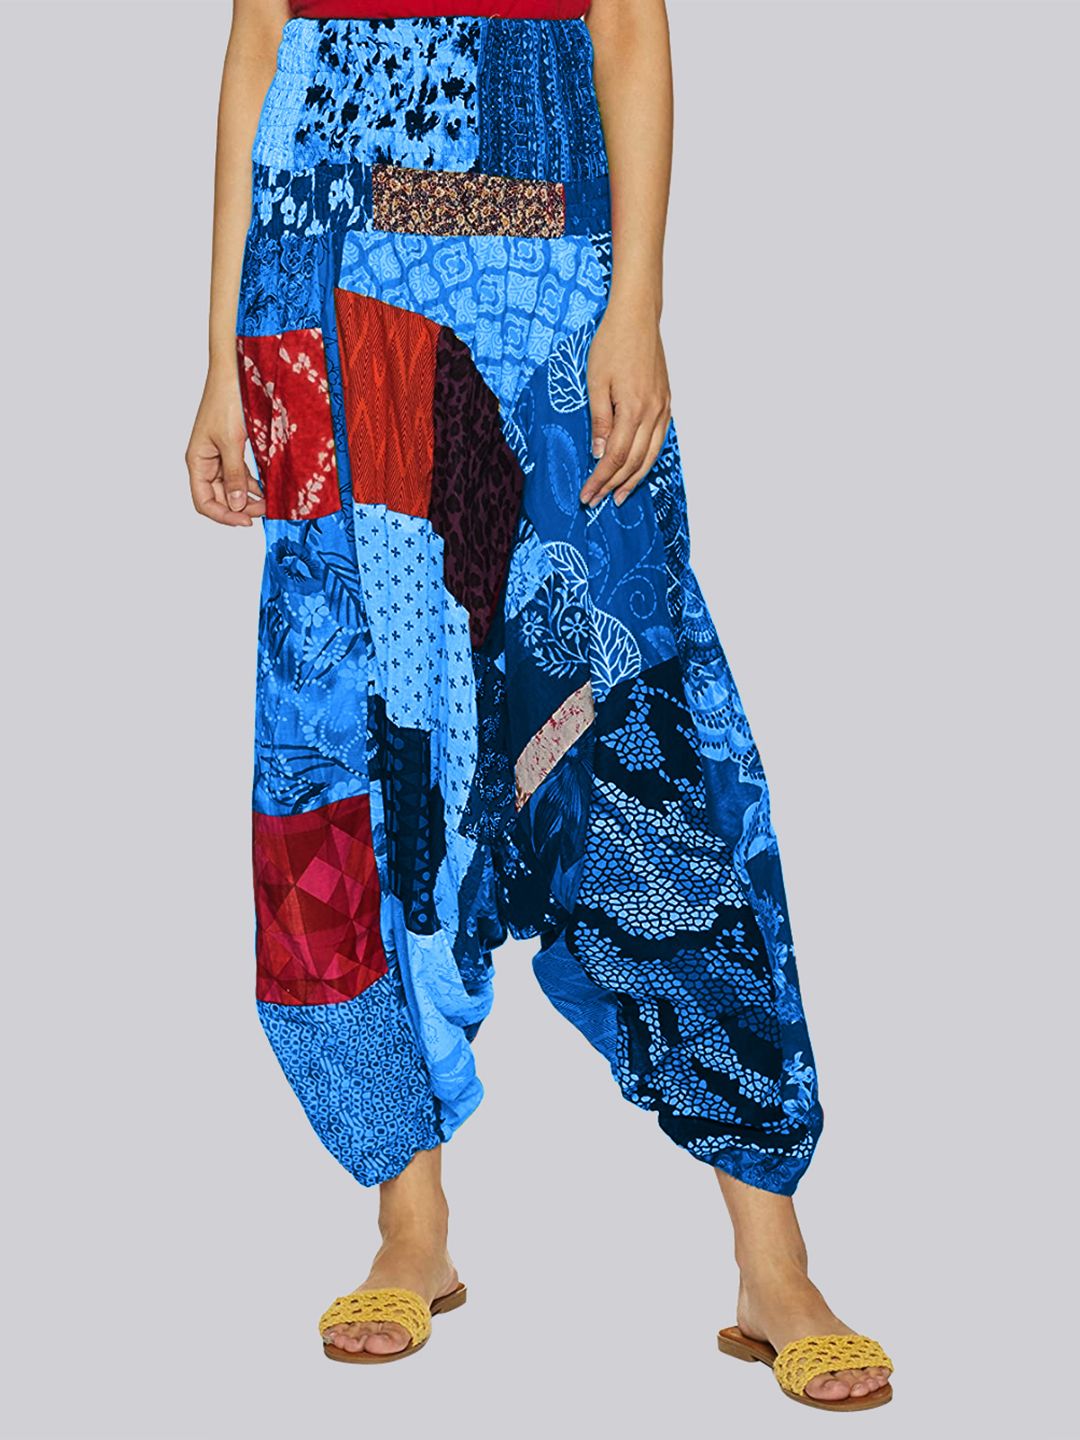 Buy BownBee Pure Cotton Half Sleeves Heart Patch Top  Coordinating Harem  Pants Set Blue for Girls 56Years Online in India Shop at FirstCrycom   14056519